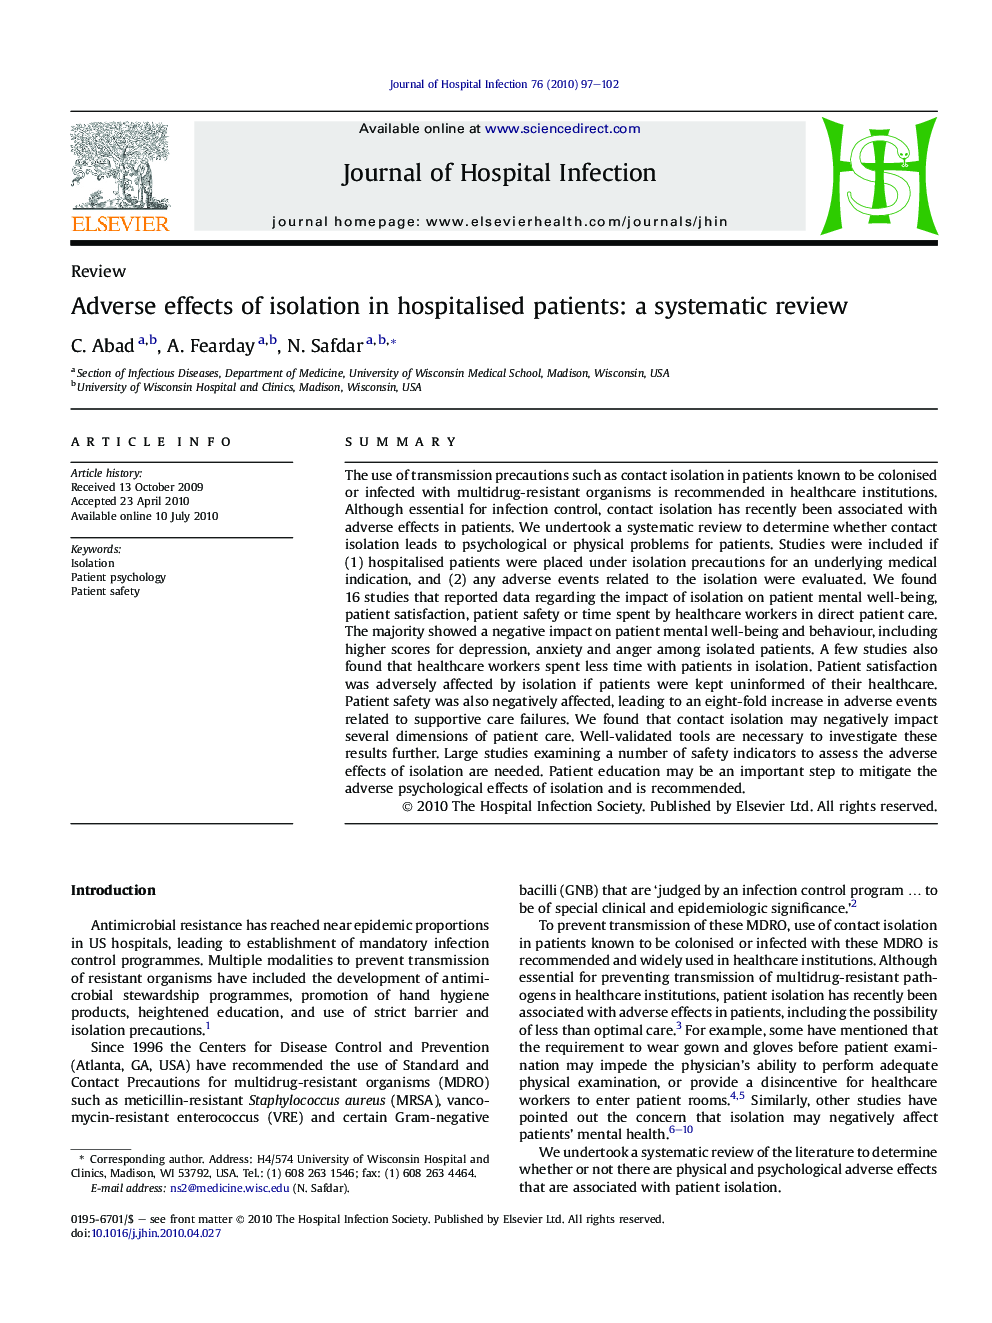 Adverse effects of isolation in hospitalised patients: a systematic review